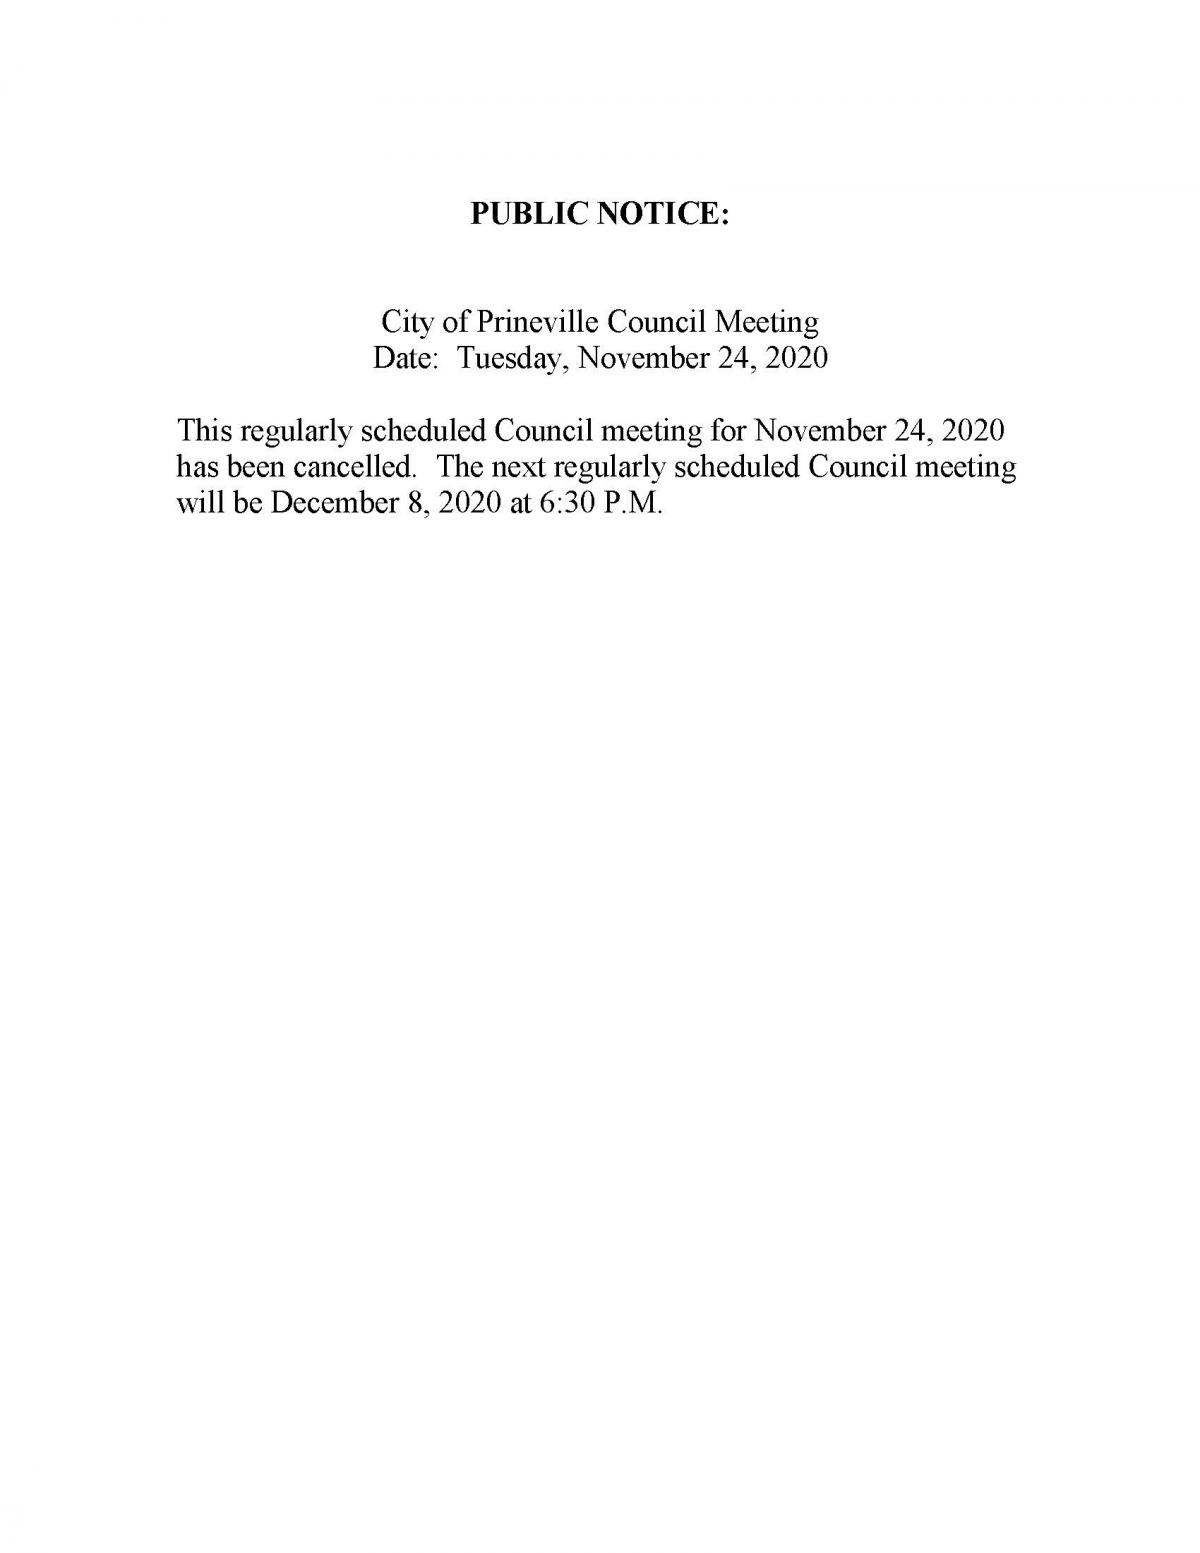 Public Notice - Regular Council Meeting 11-24-2020 Cancelled